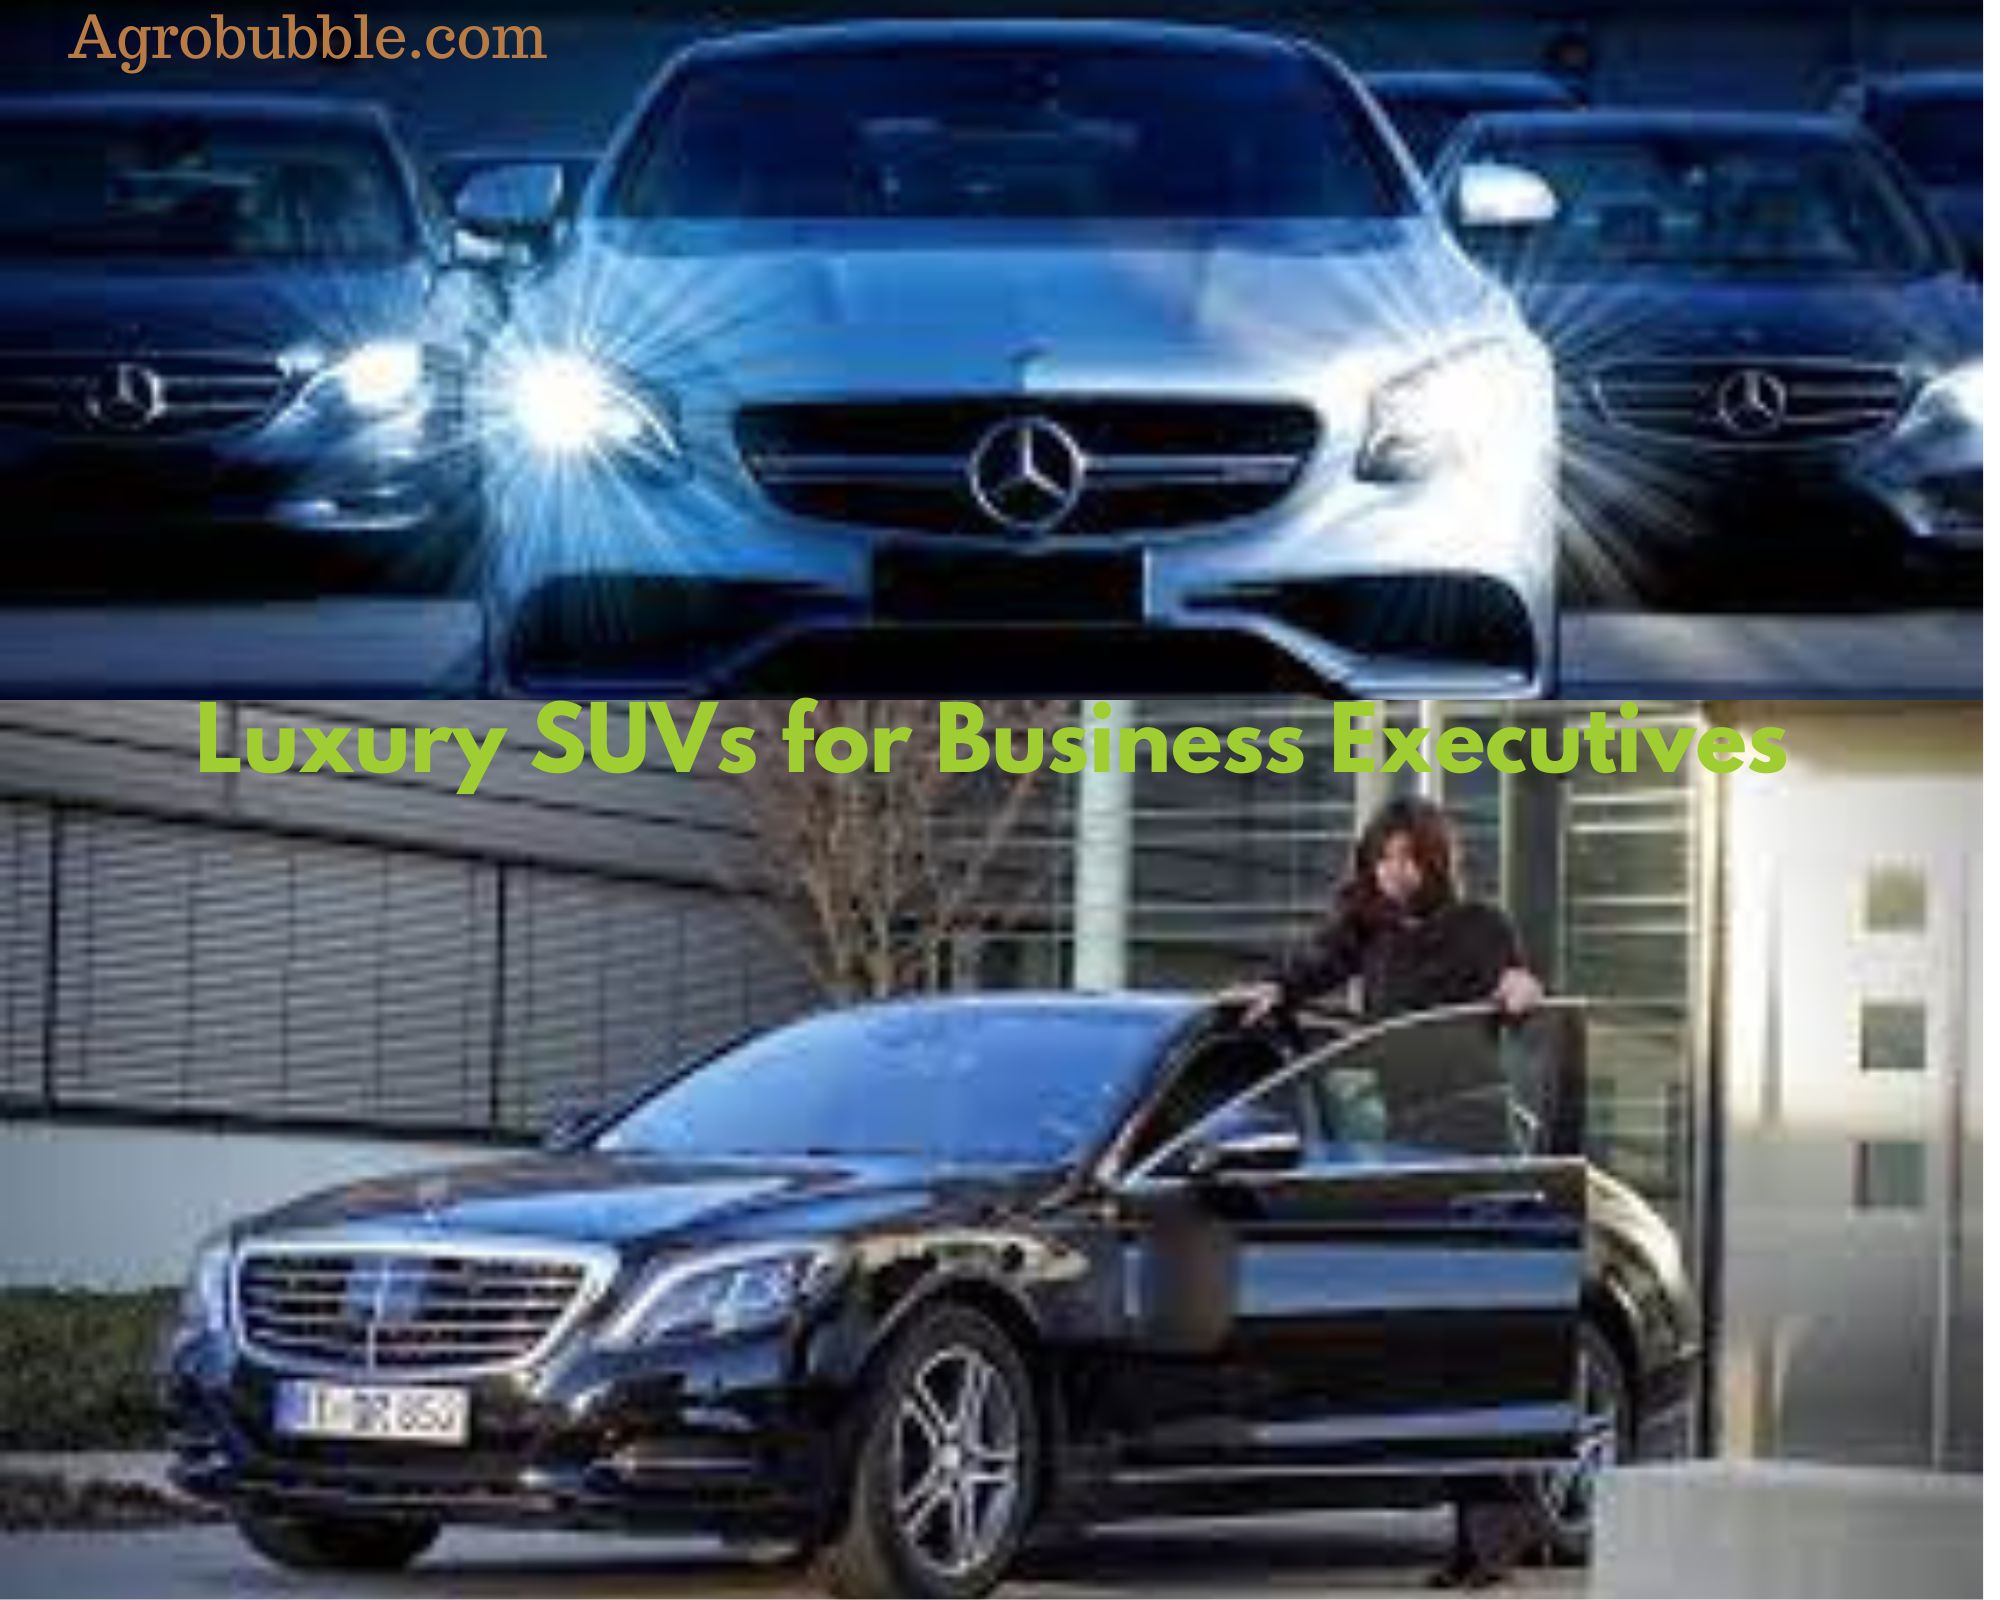 Luxury SUVs for Business Executives